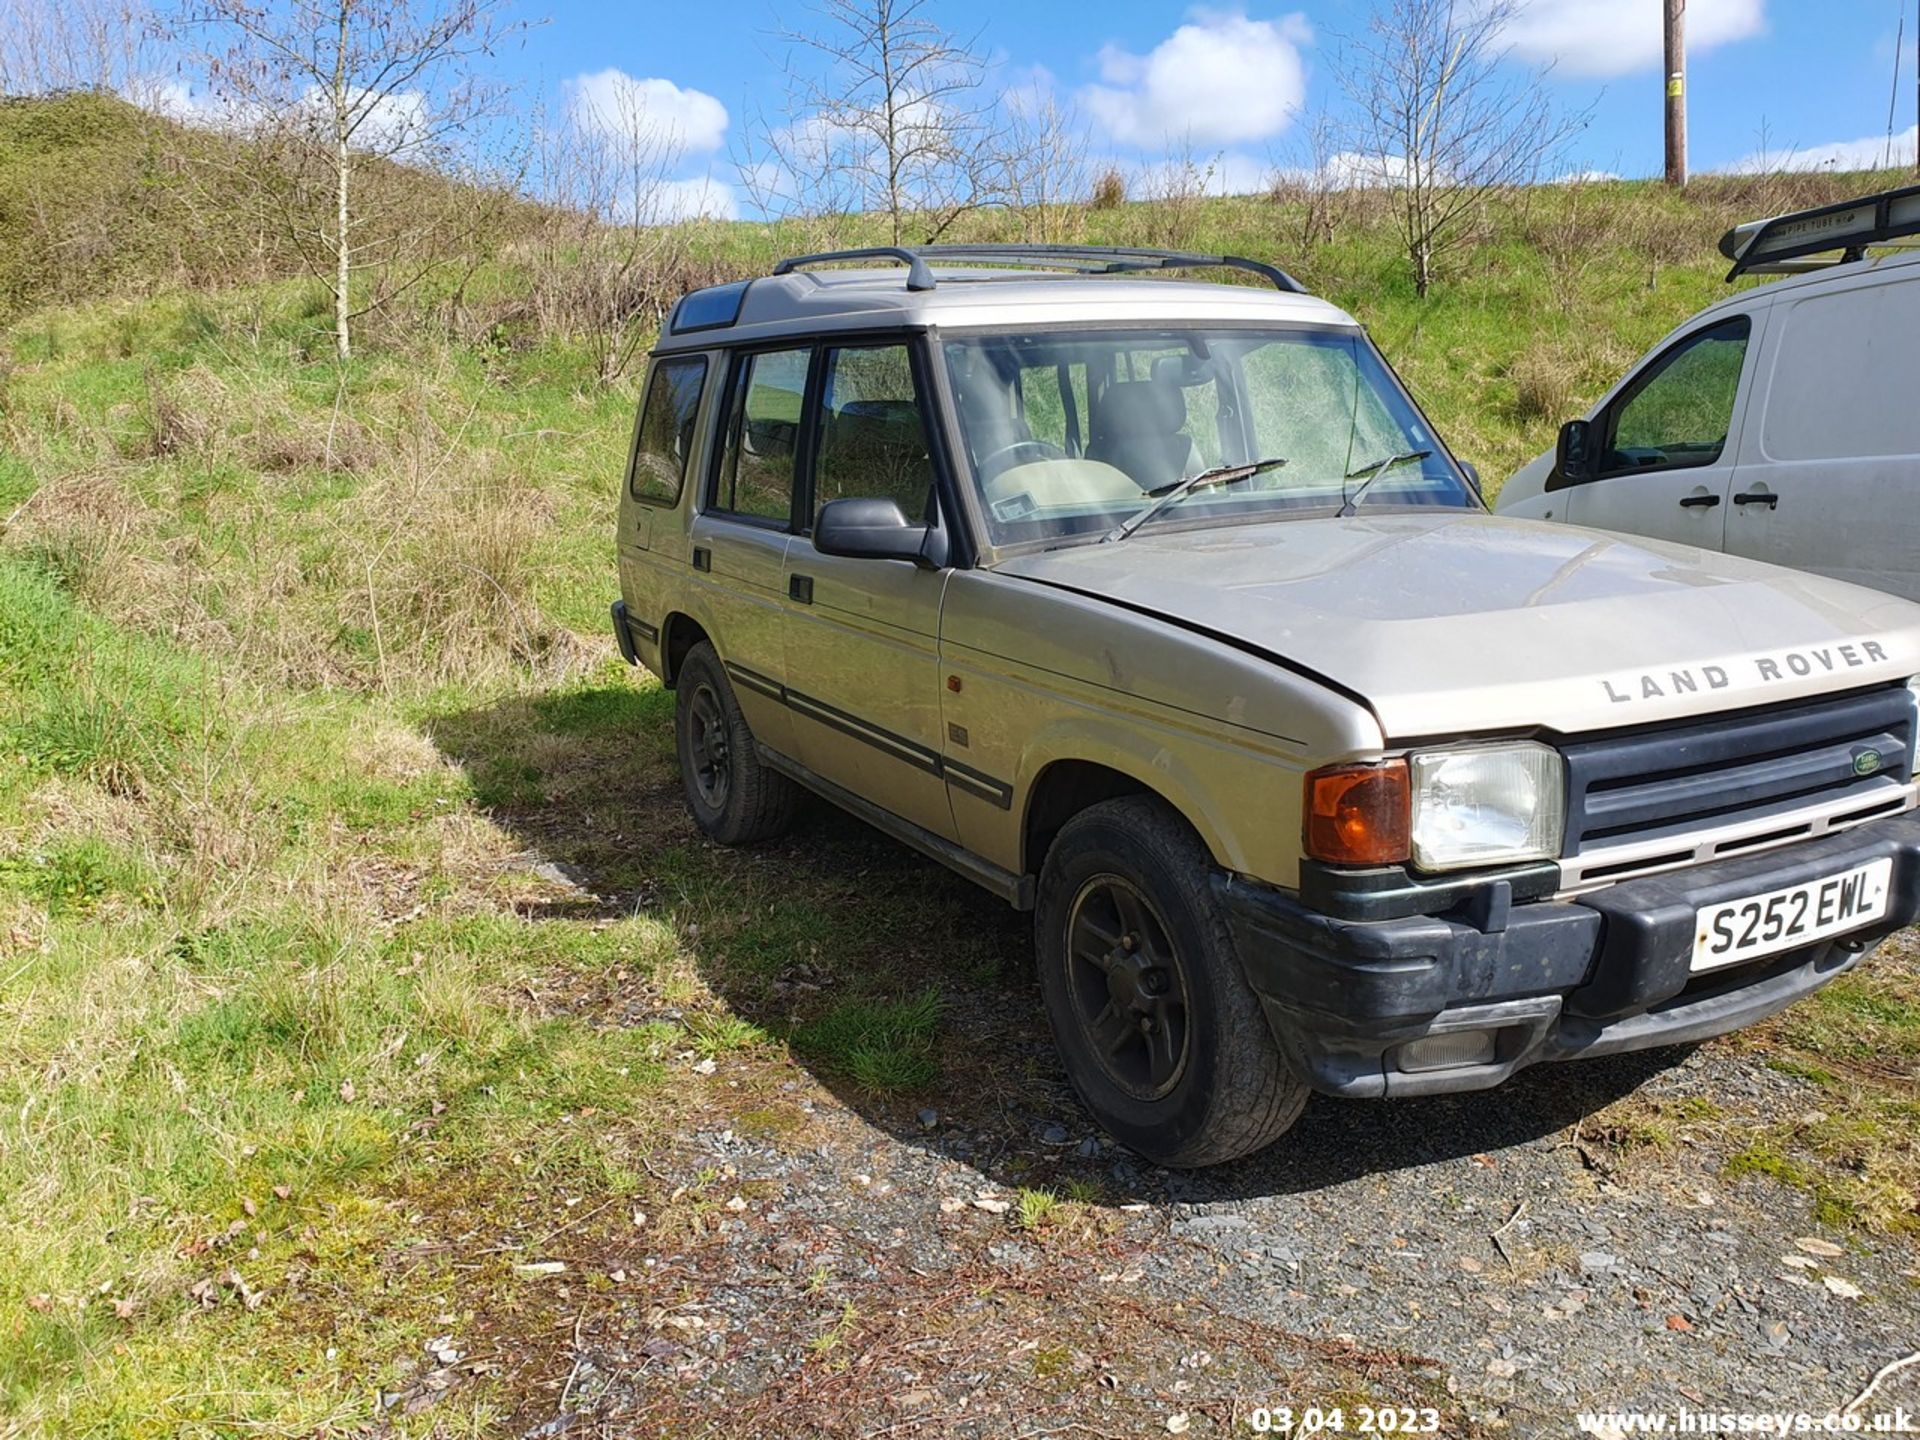 1998 LAND ROVER DISCOVERY ES TDI - 2495cc 5dr Estate (Gold) - Image 8 of 31